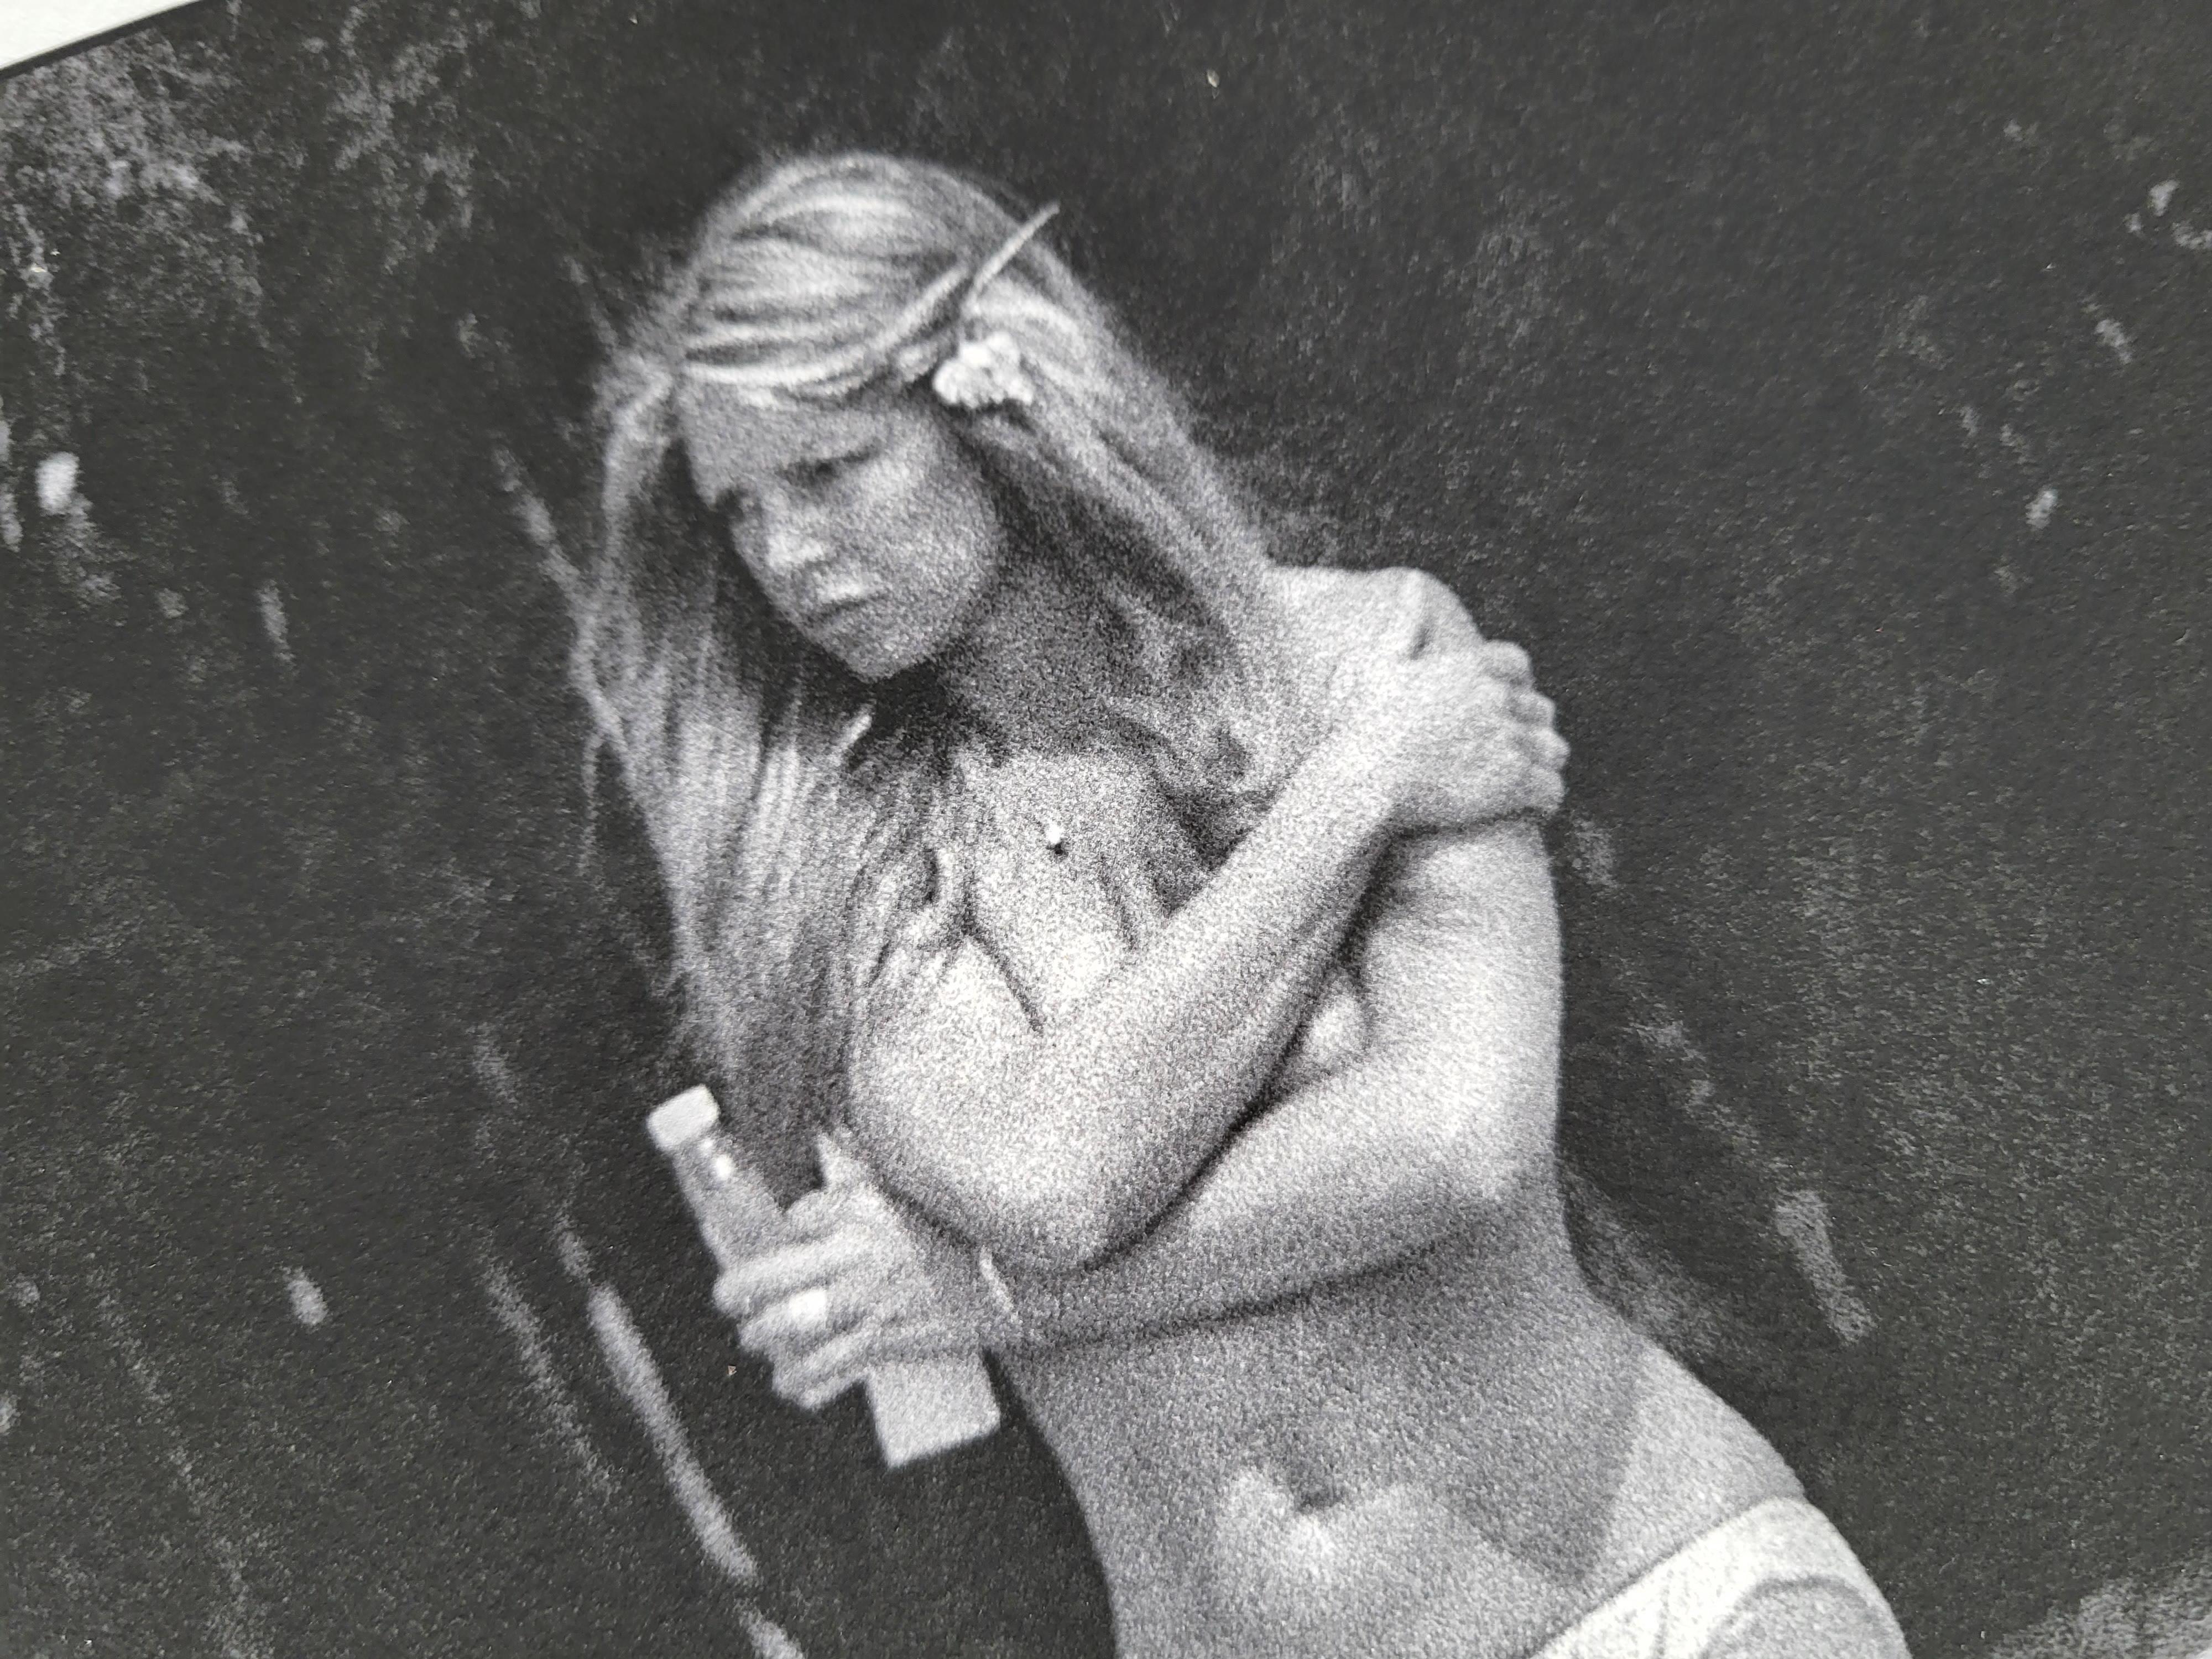 Brigitte Bardot. Francis Apesteguy
Vintage silver print on RC paper
1976
Photograph signed, titled and numbered 29/30 on the back
Dimensions : 40 x 60 cm
